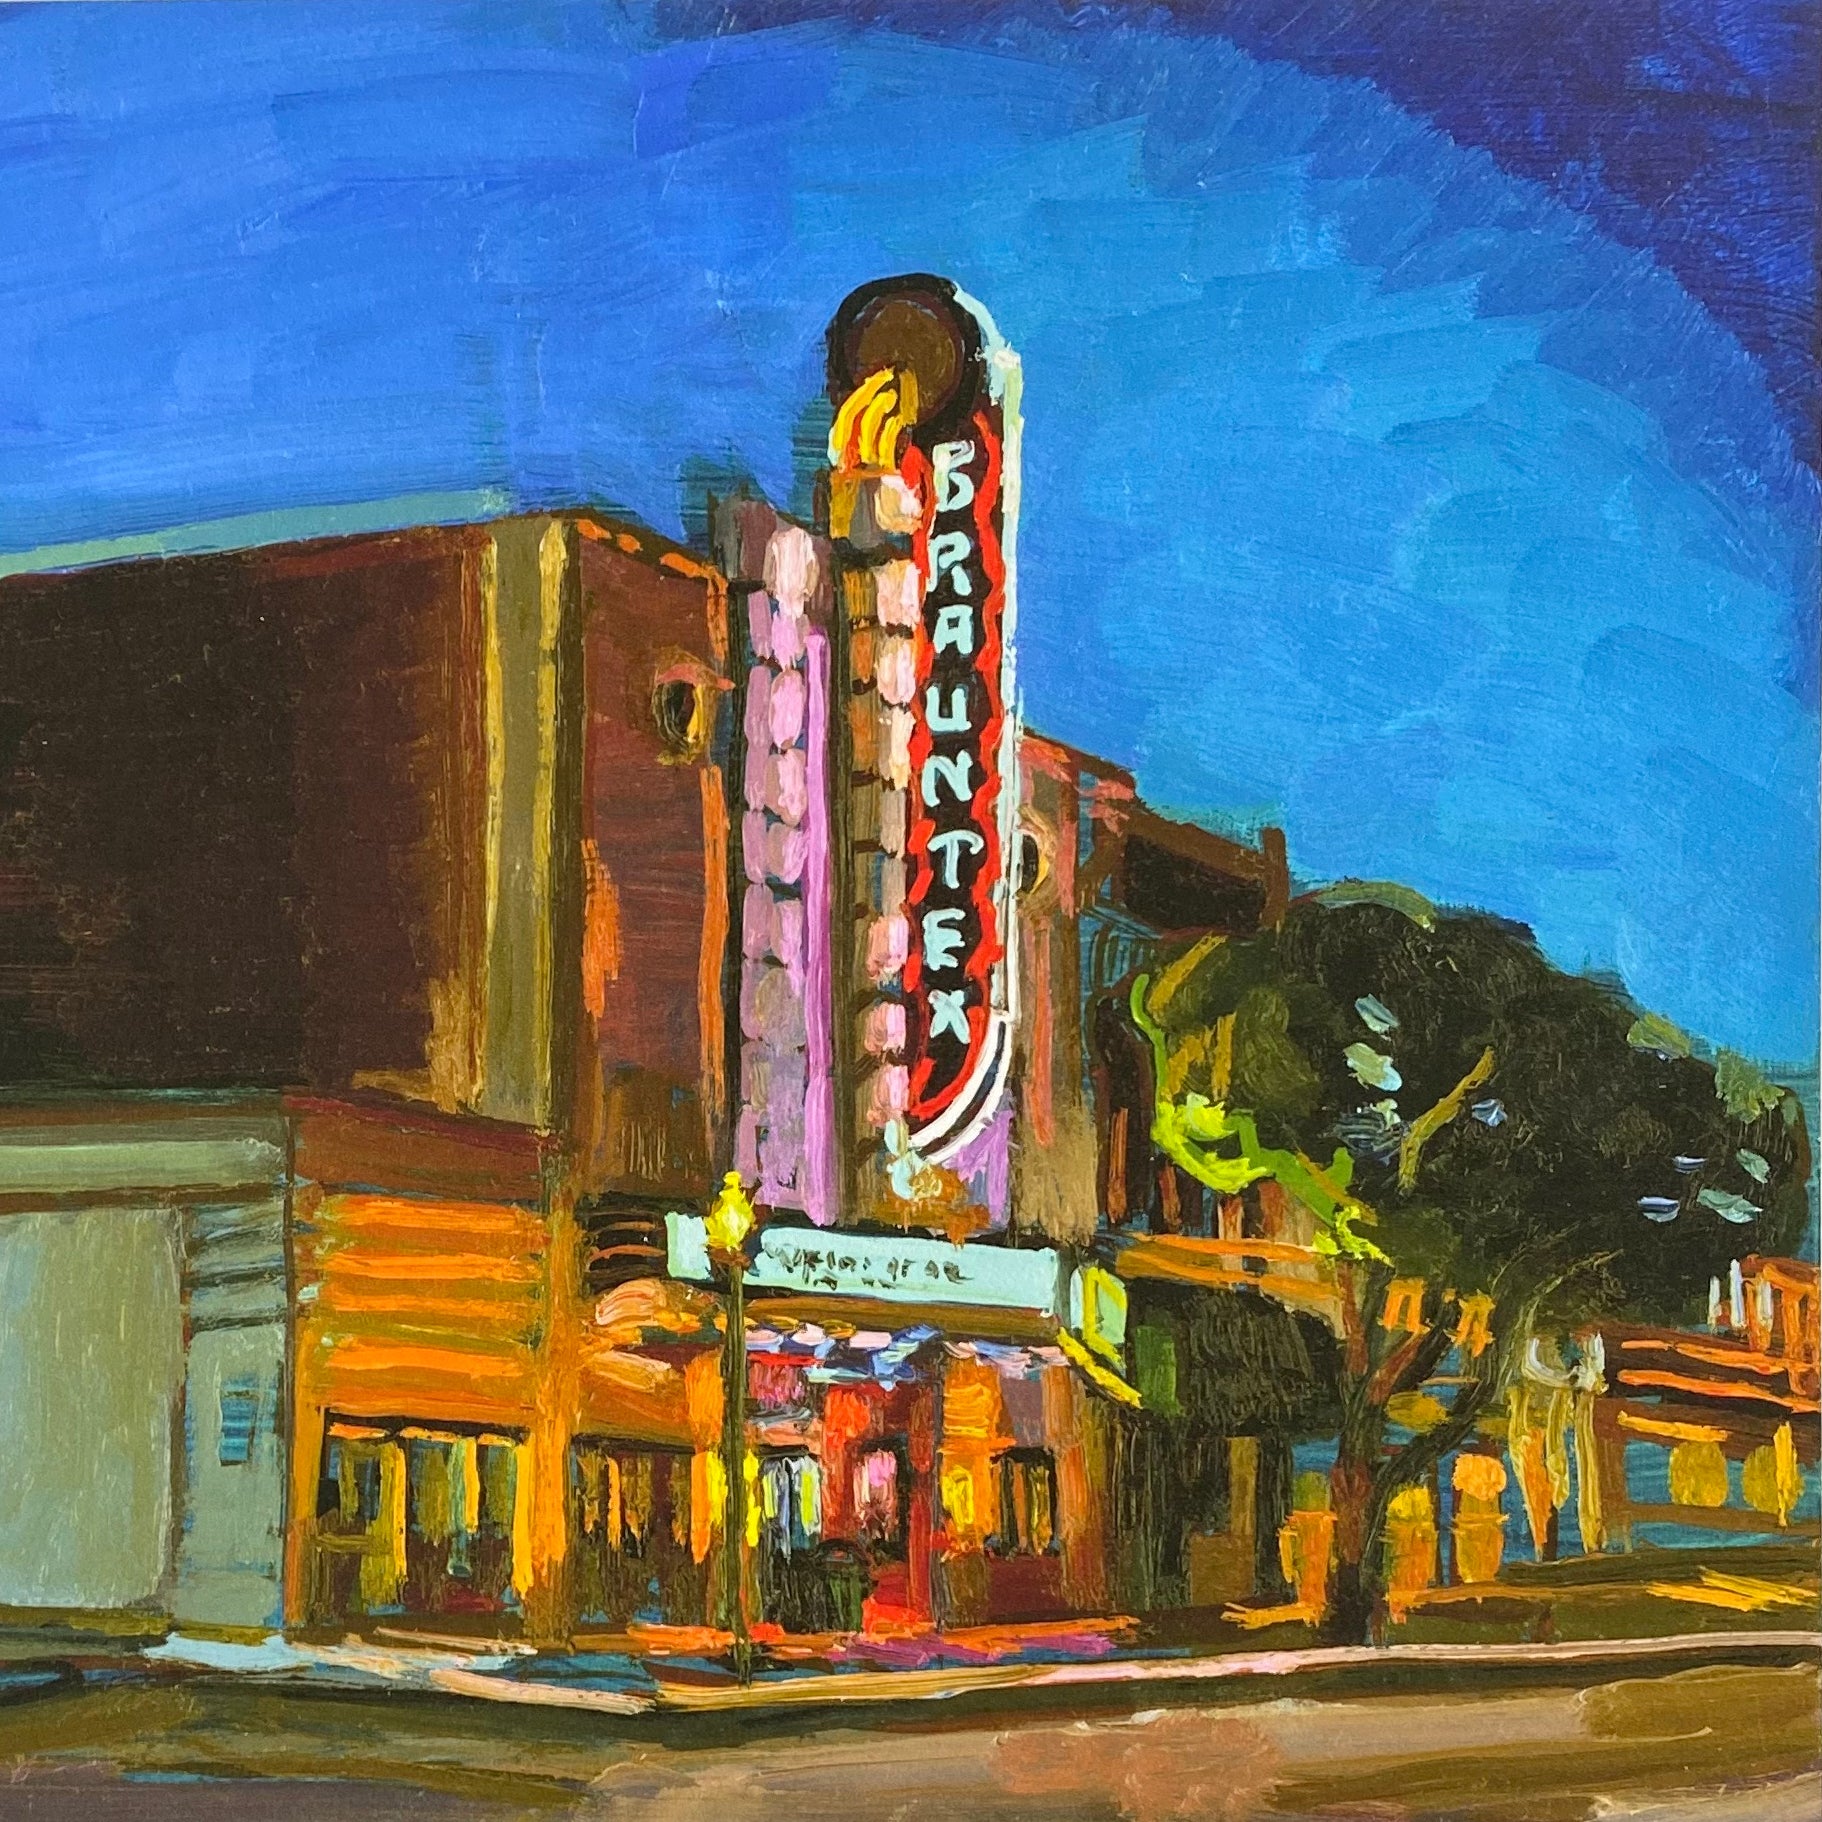 Cobalt Art Deco Art | signed print of painting of historic theatre with neon colors | Texas Wall Art | Austin Art Gift | Architecture Art